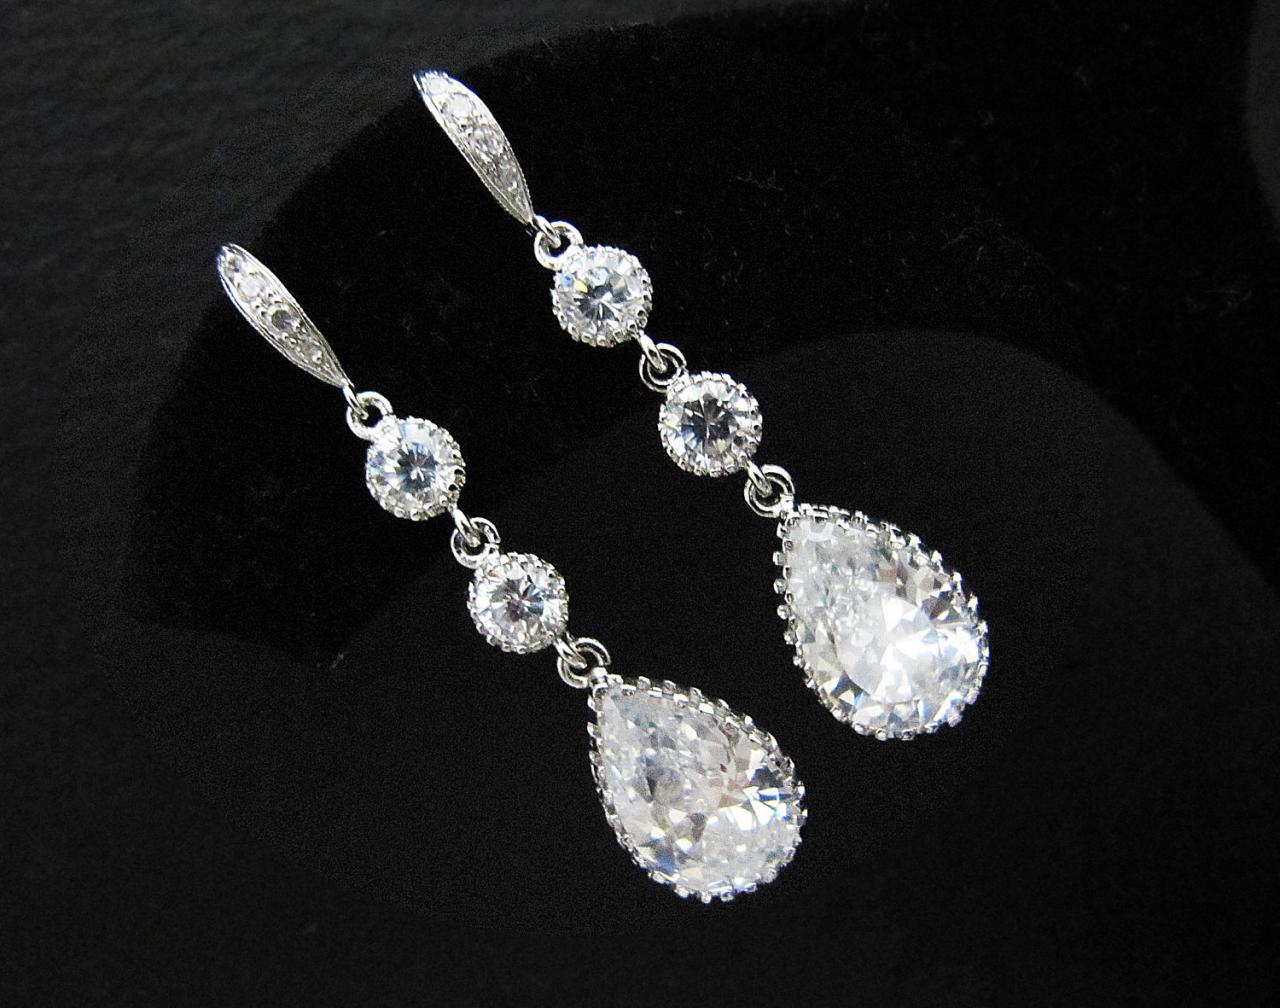 Wedding Jewelry Bridal Earrings Bridesmaid Earrings Cubic Zirconia Connectors And (m) Cubic Zirconia Crystal Tear Drops